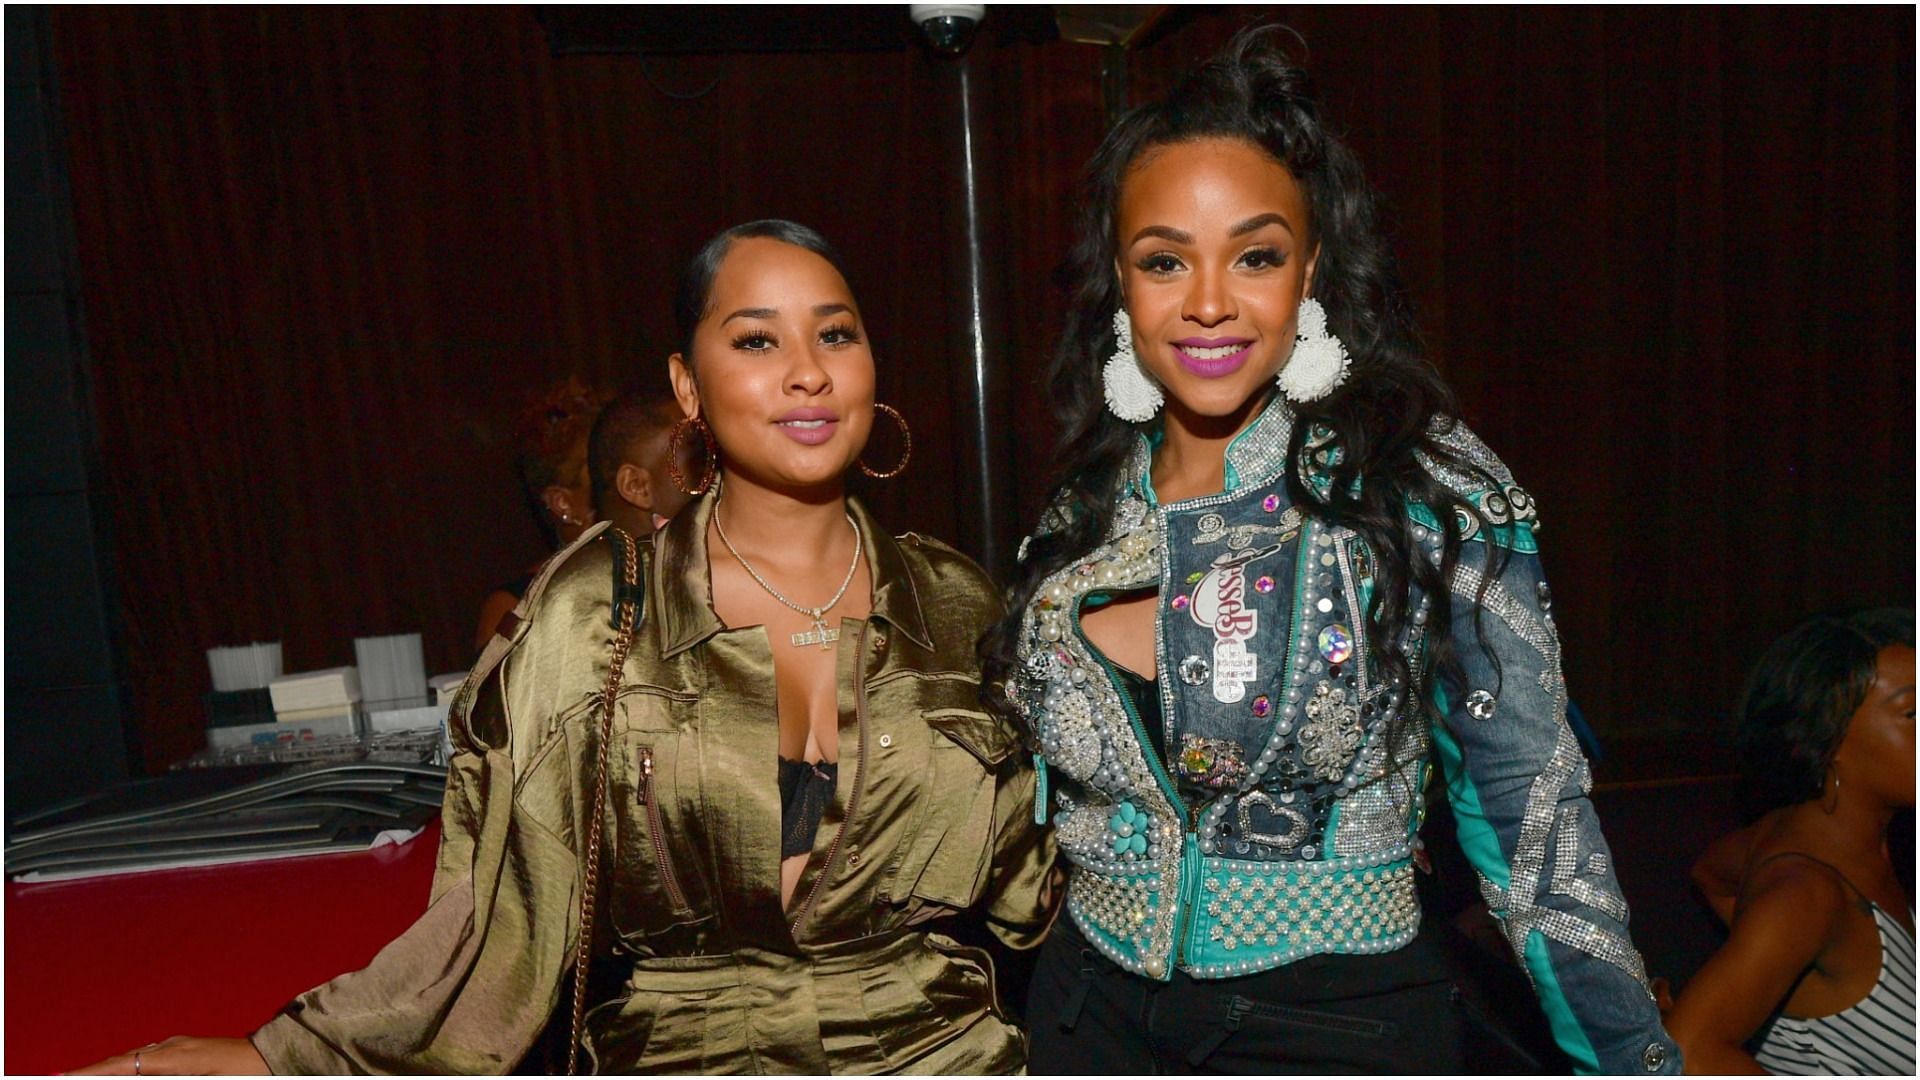 Tammy Rivera and Masika Kalysha attend the return of growing up Hip Hop at Tongue &amp; Groove City on October 2, 2018 in Atlanta, Georgia. (Image via Getty Images)